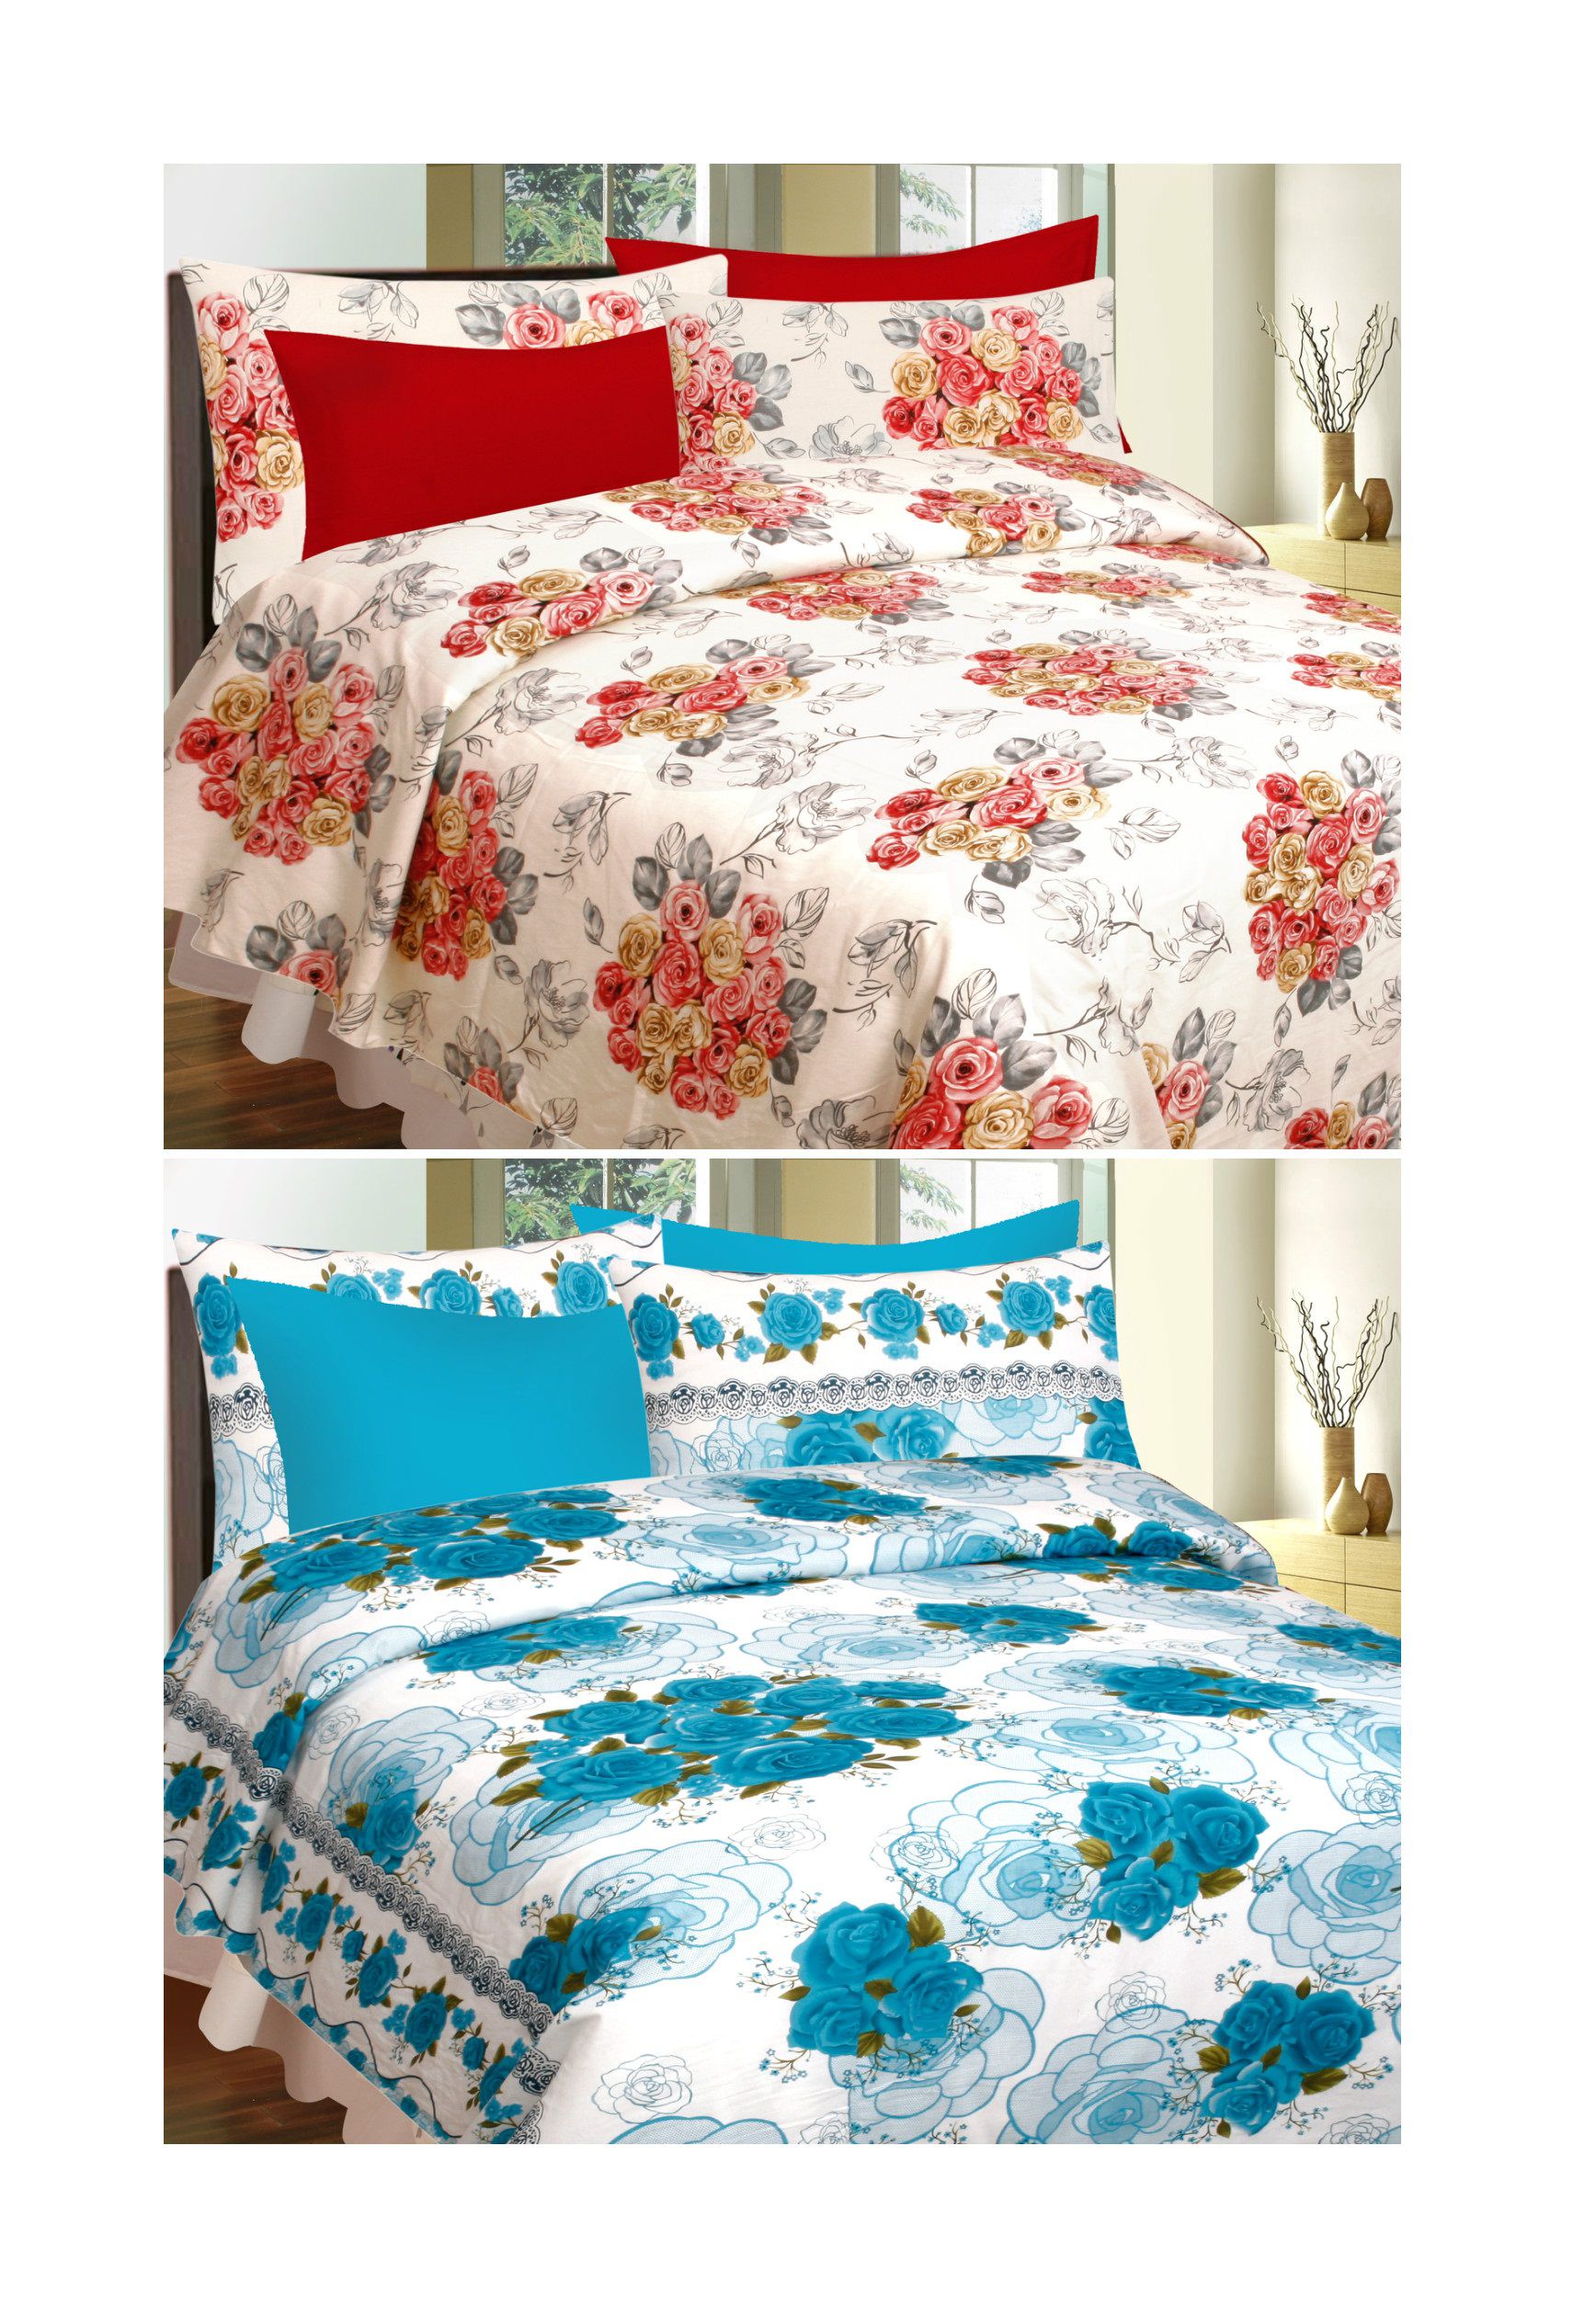     			Divine Casa - Buy 1 Get 1 - Double Cotton Abstract Bed Sheet